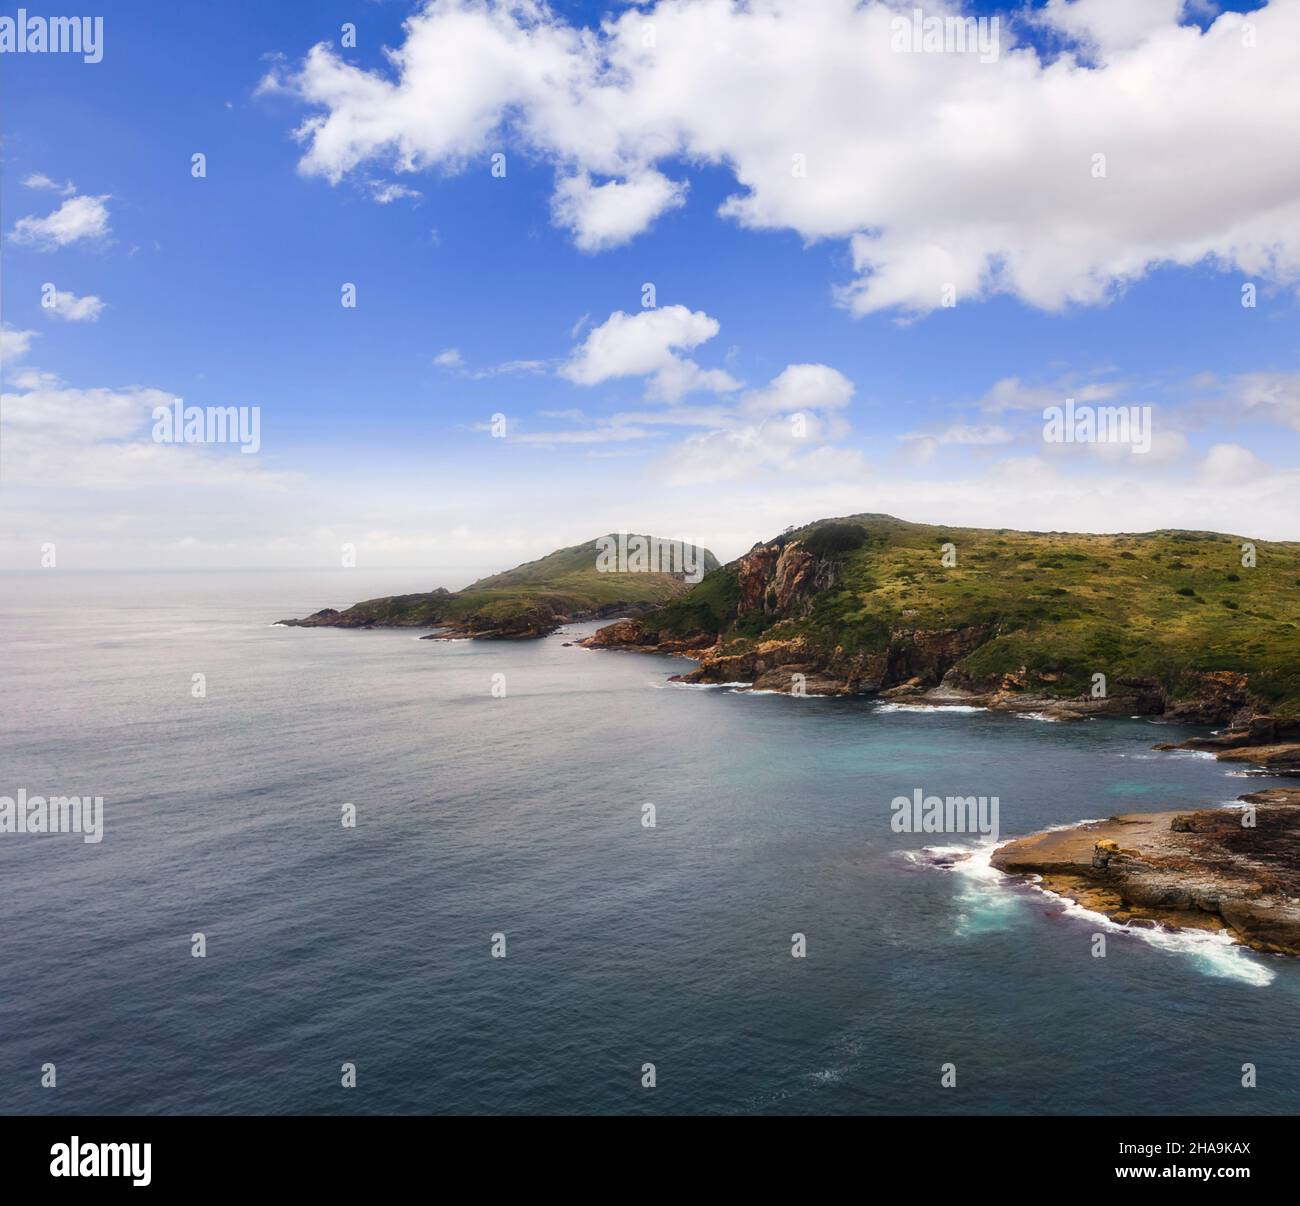 Eroded cliffs of Broughton island on Australian Pacific coast facing open ocean in aerial seascape view. Stock Photo